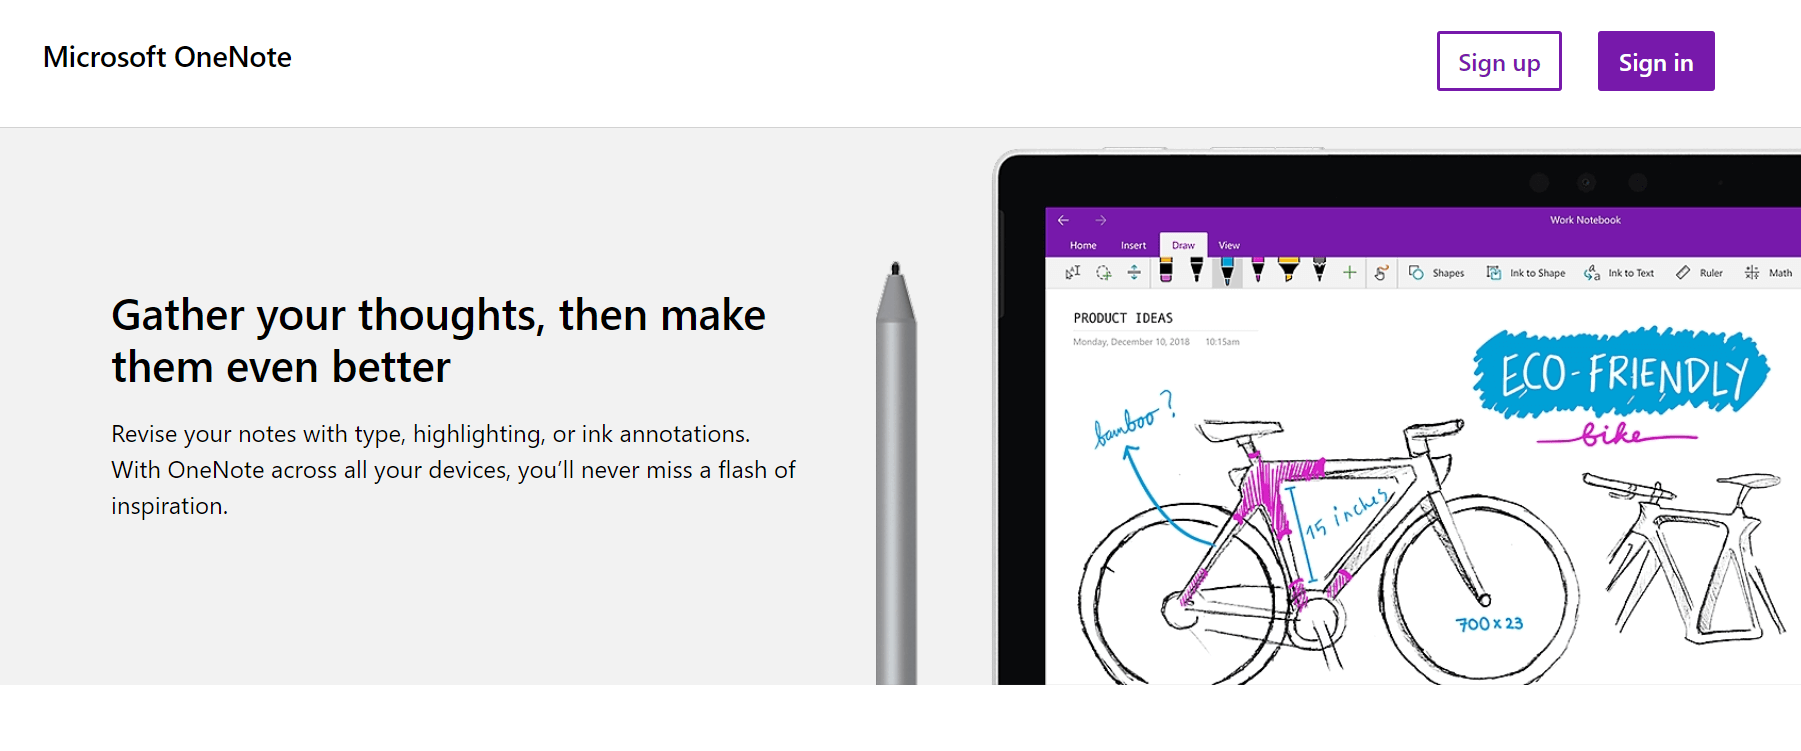 Pros and Cons of Microsoft OneNote
